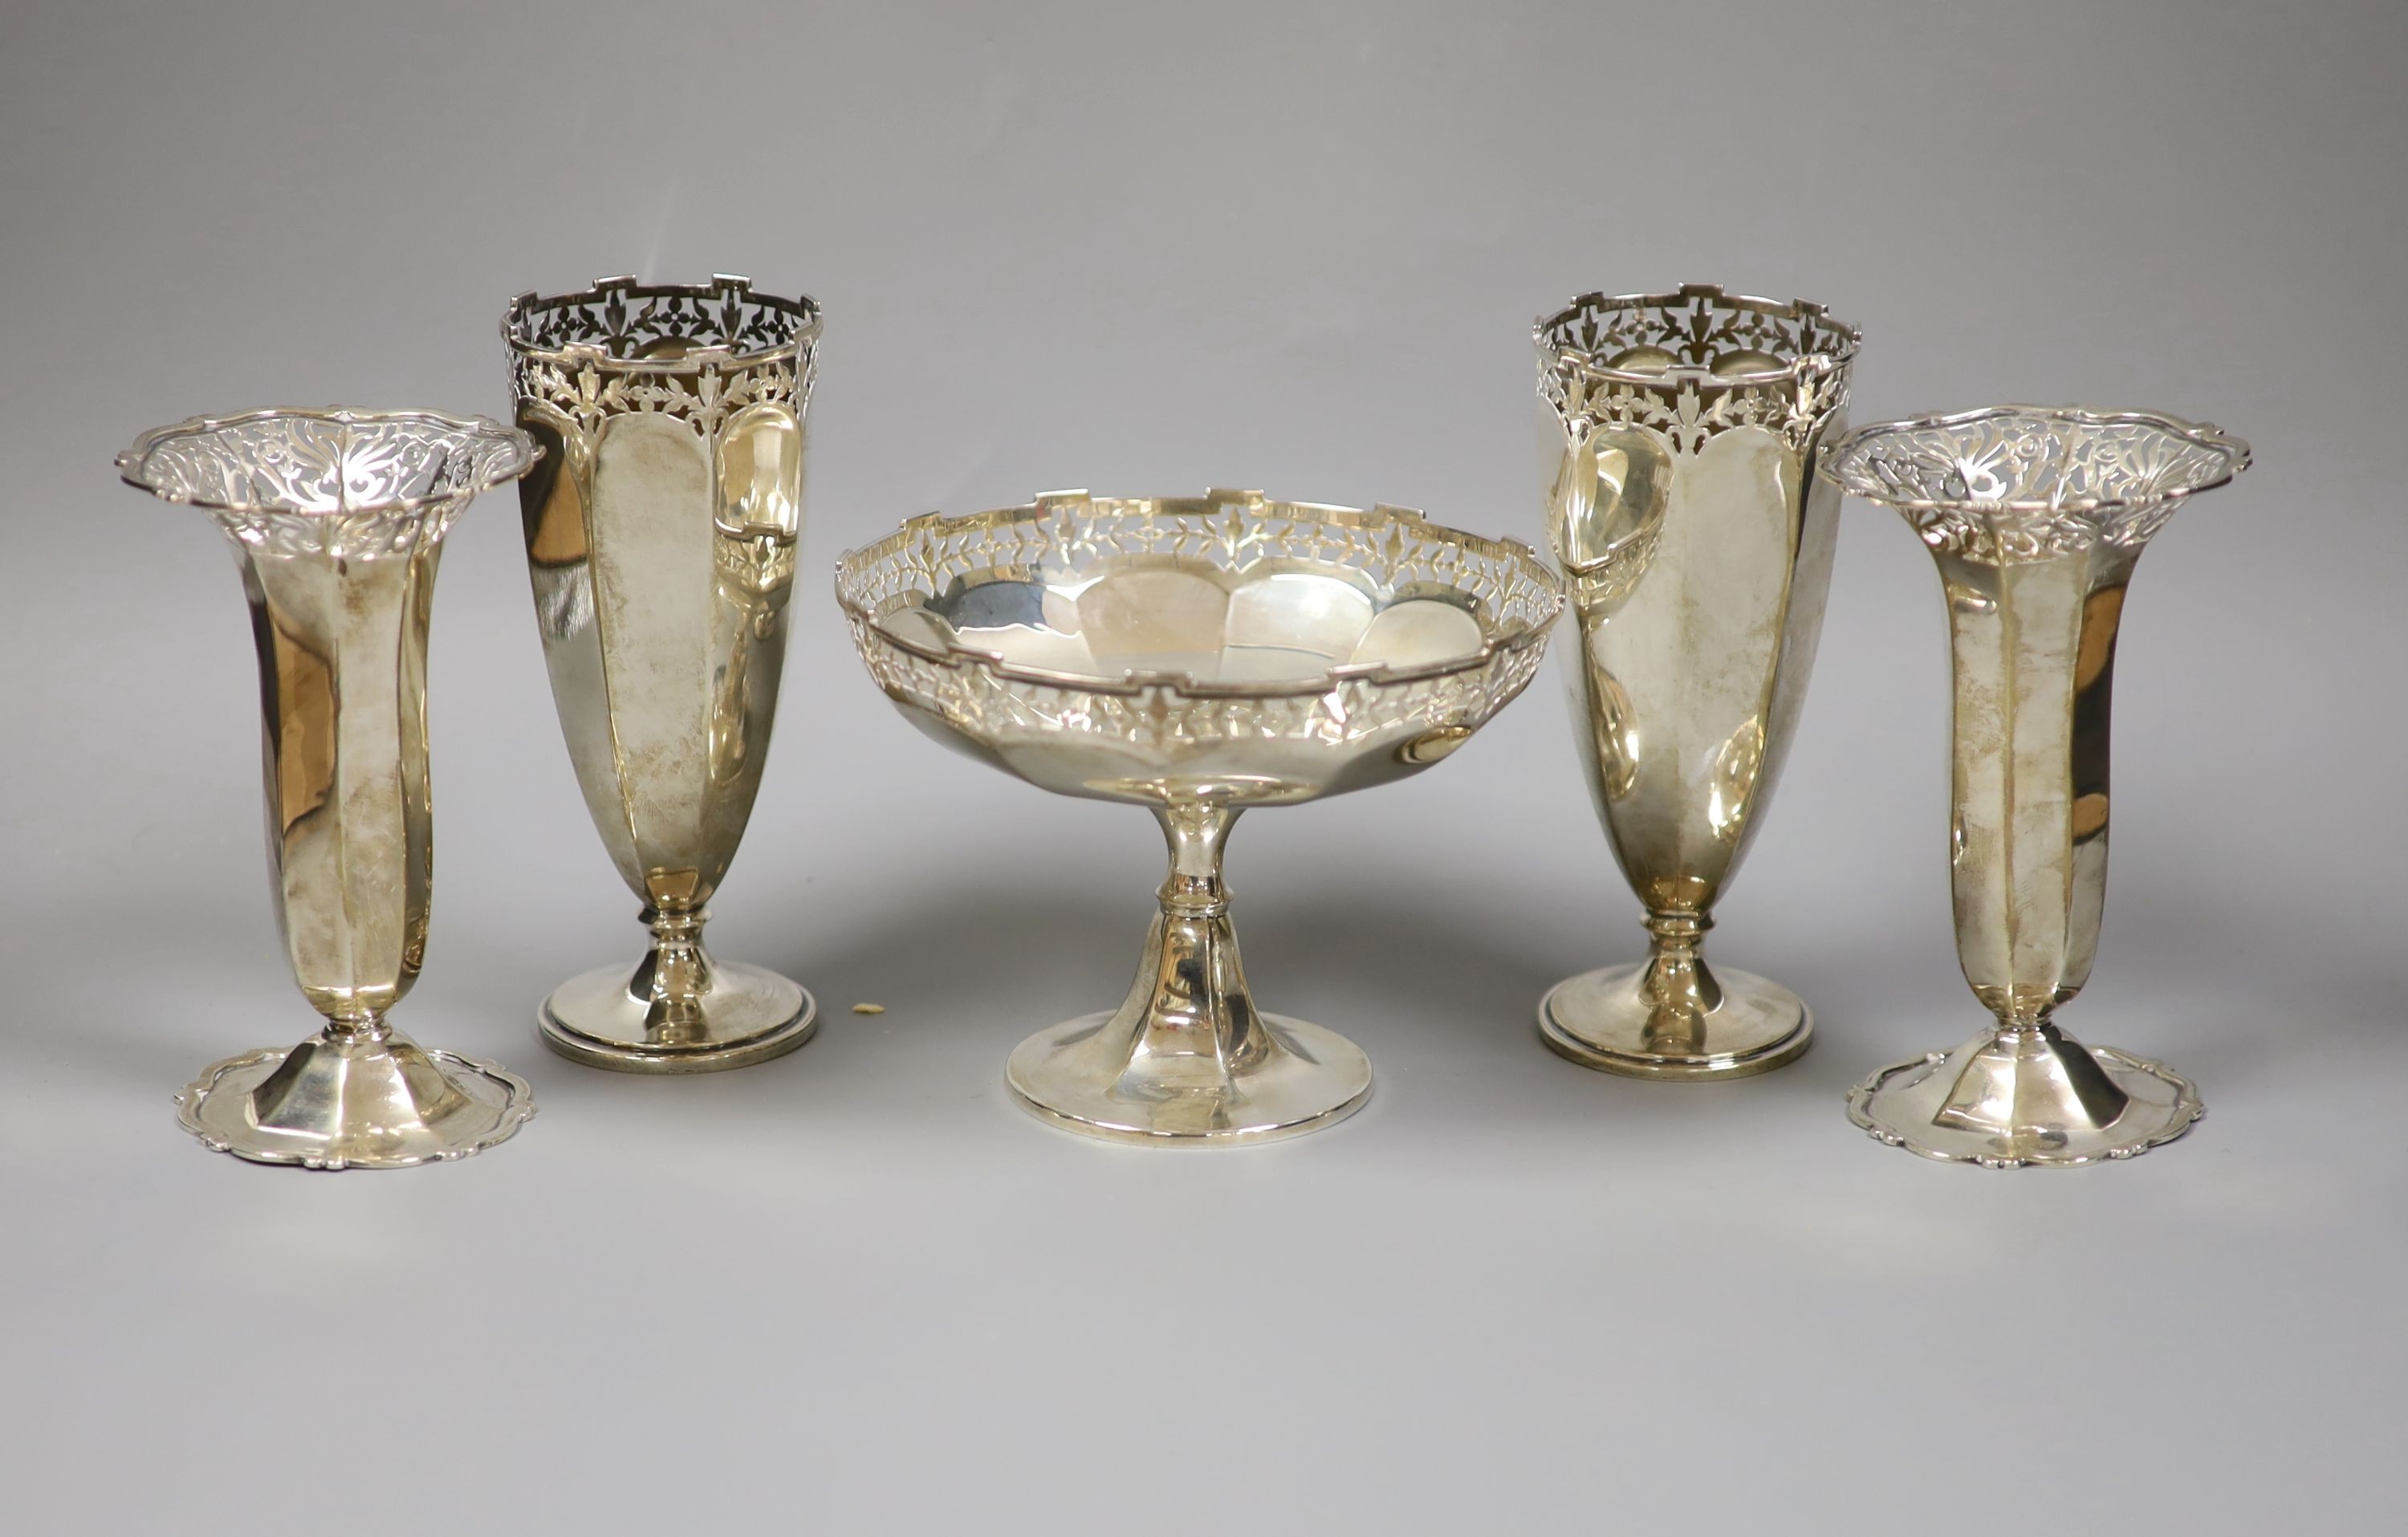 Two pairs Edwardian silver posy vases, London, 1901 and 1904, Goldsmiths & Silversmiths Co Ltd, together with a George V small pedestal bowl, Birmingham 1924 (mark rubbed) (5) total weight 24.0 ozt.                      